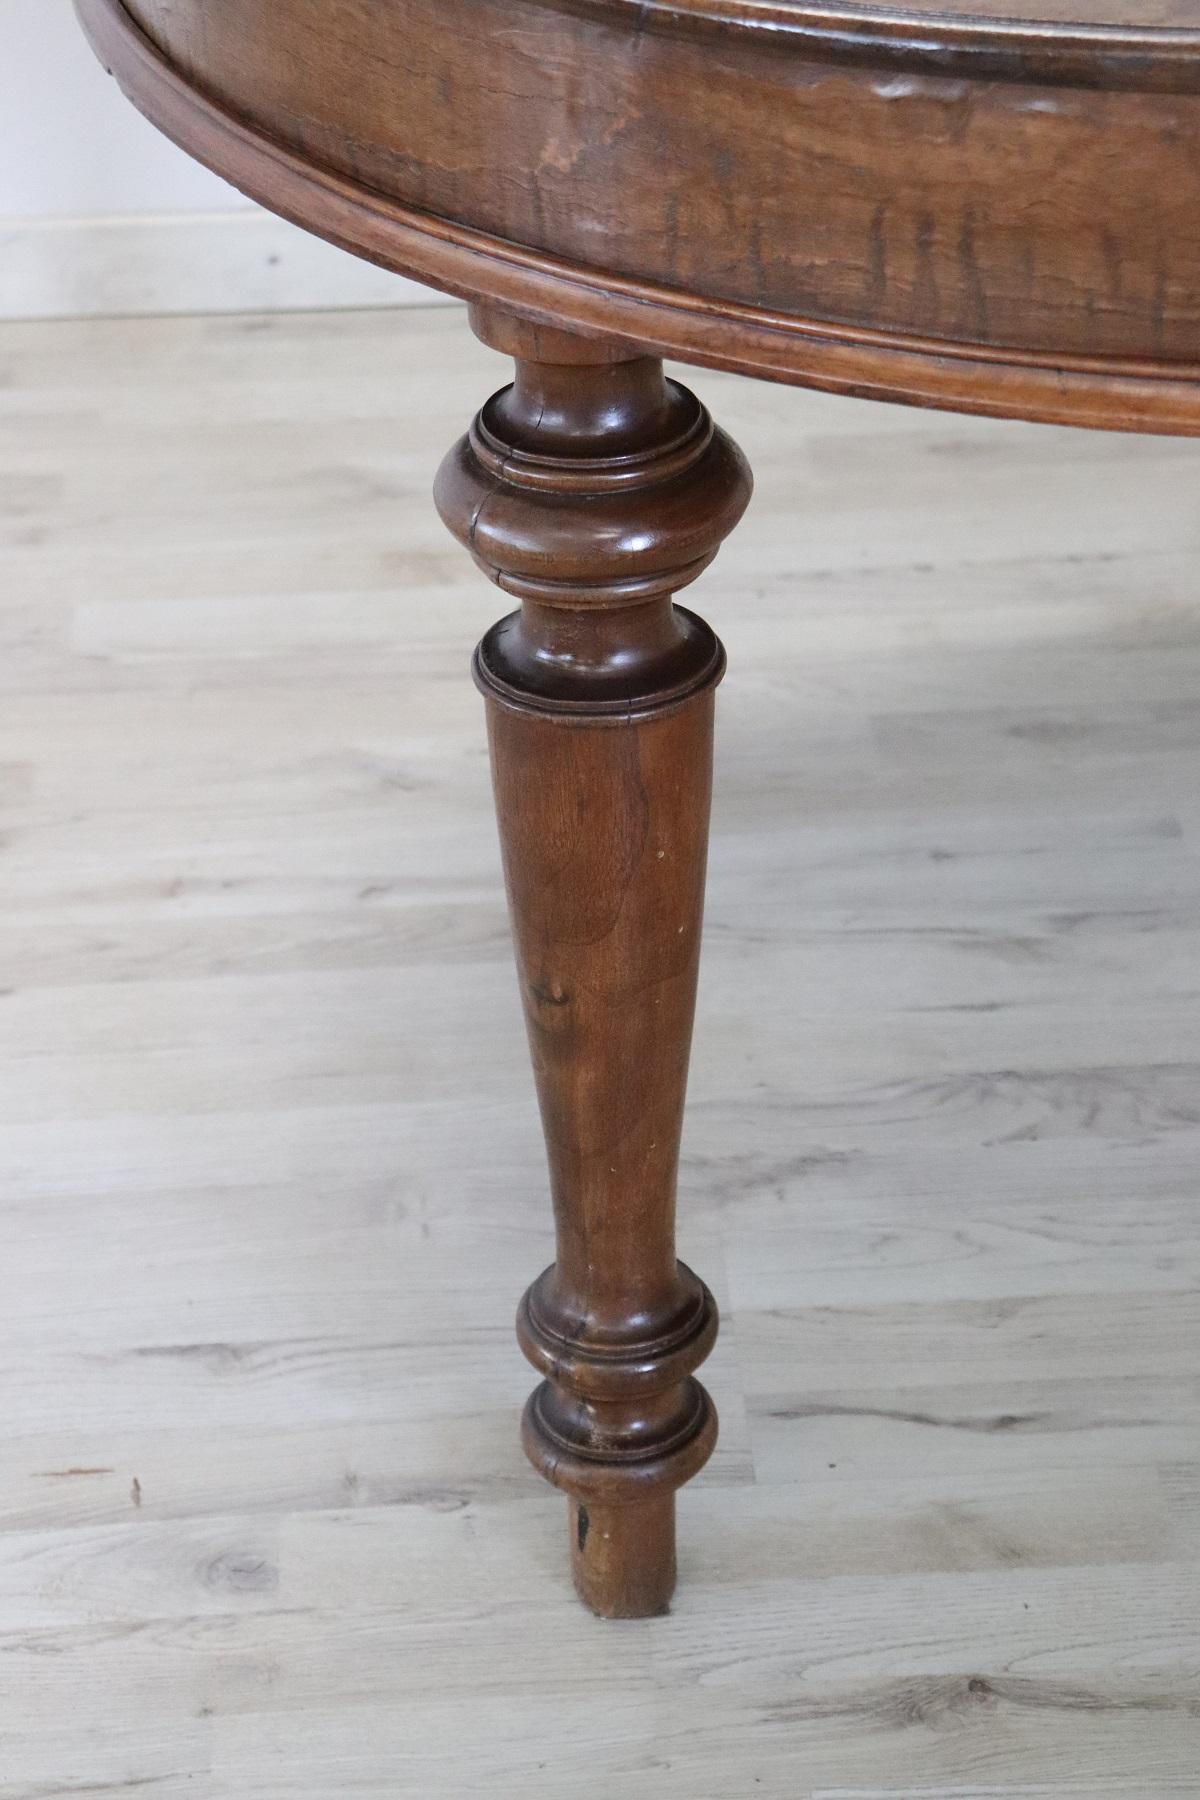 Beautiful important antique round dining room table, 1850s in walnut. This table is perfect for a dining room, it extends into the center becoming a large table that can accommodate many people. The four legs are in solid walnut wood. The original